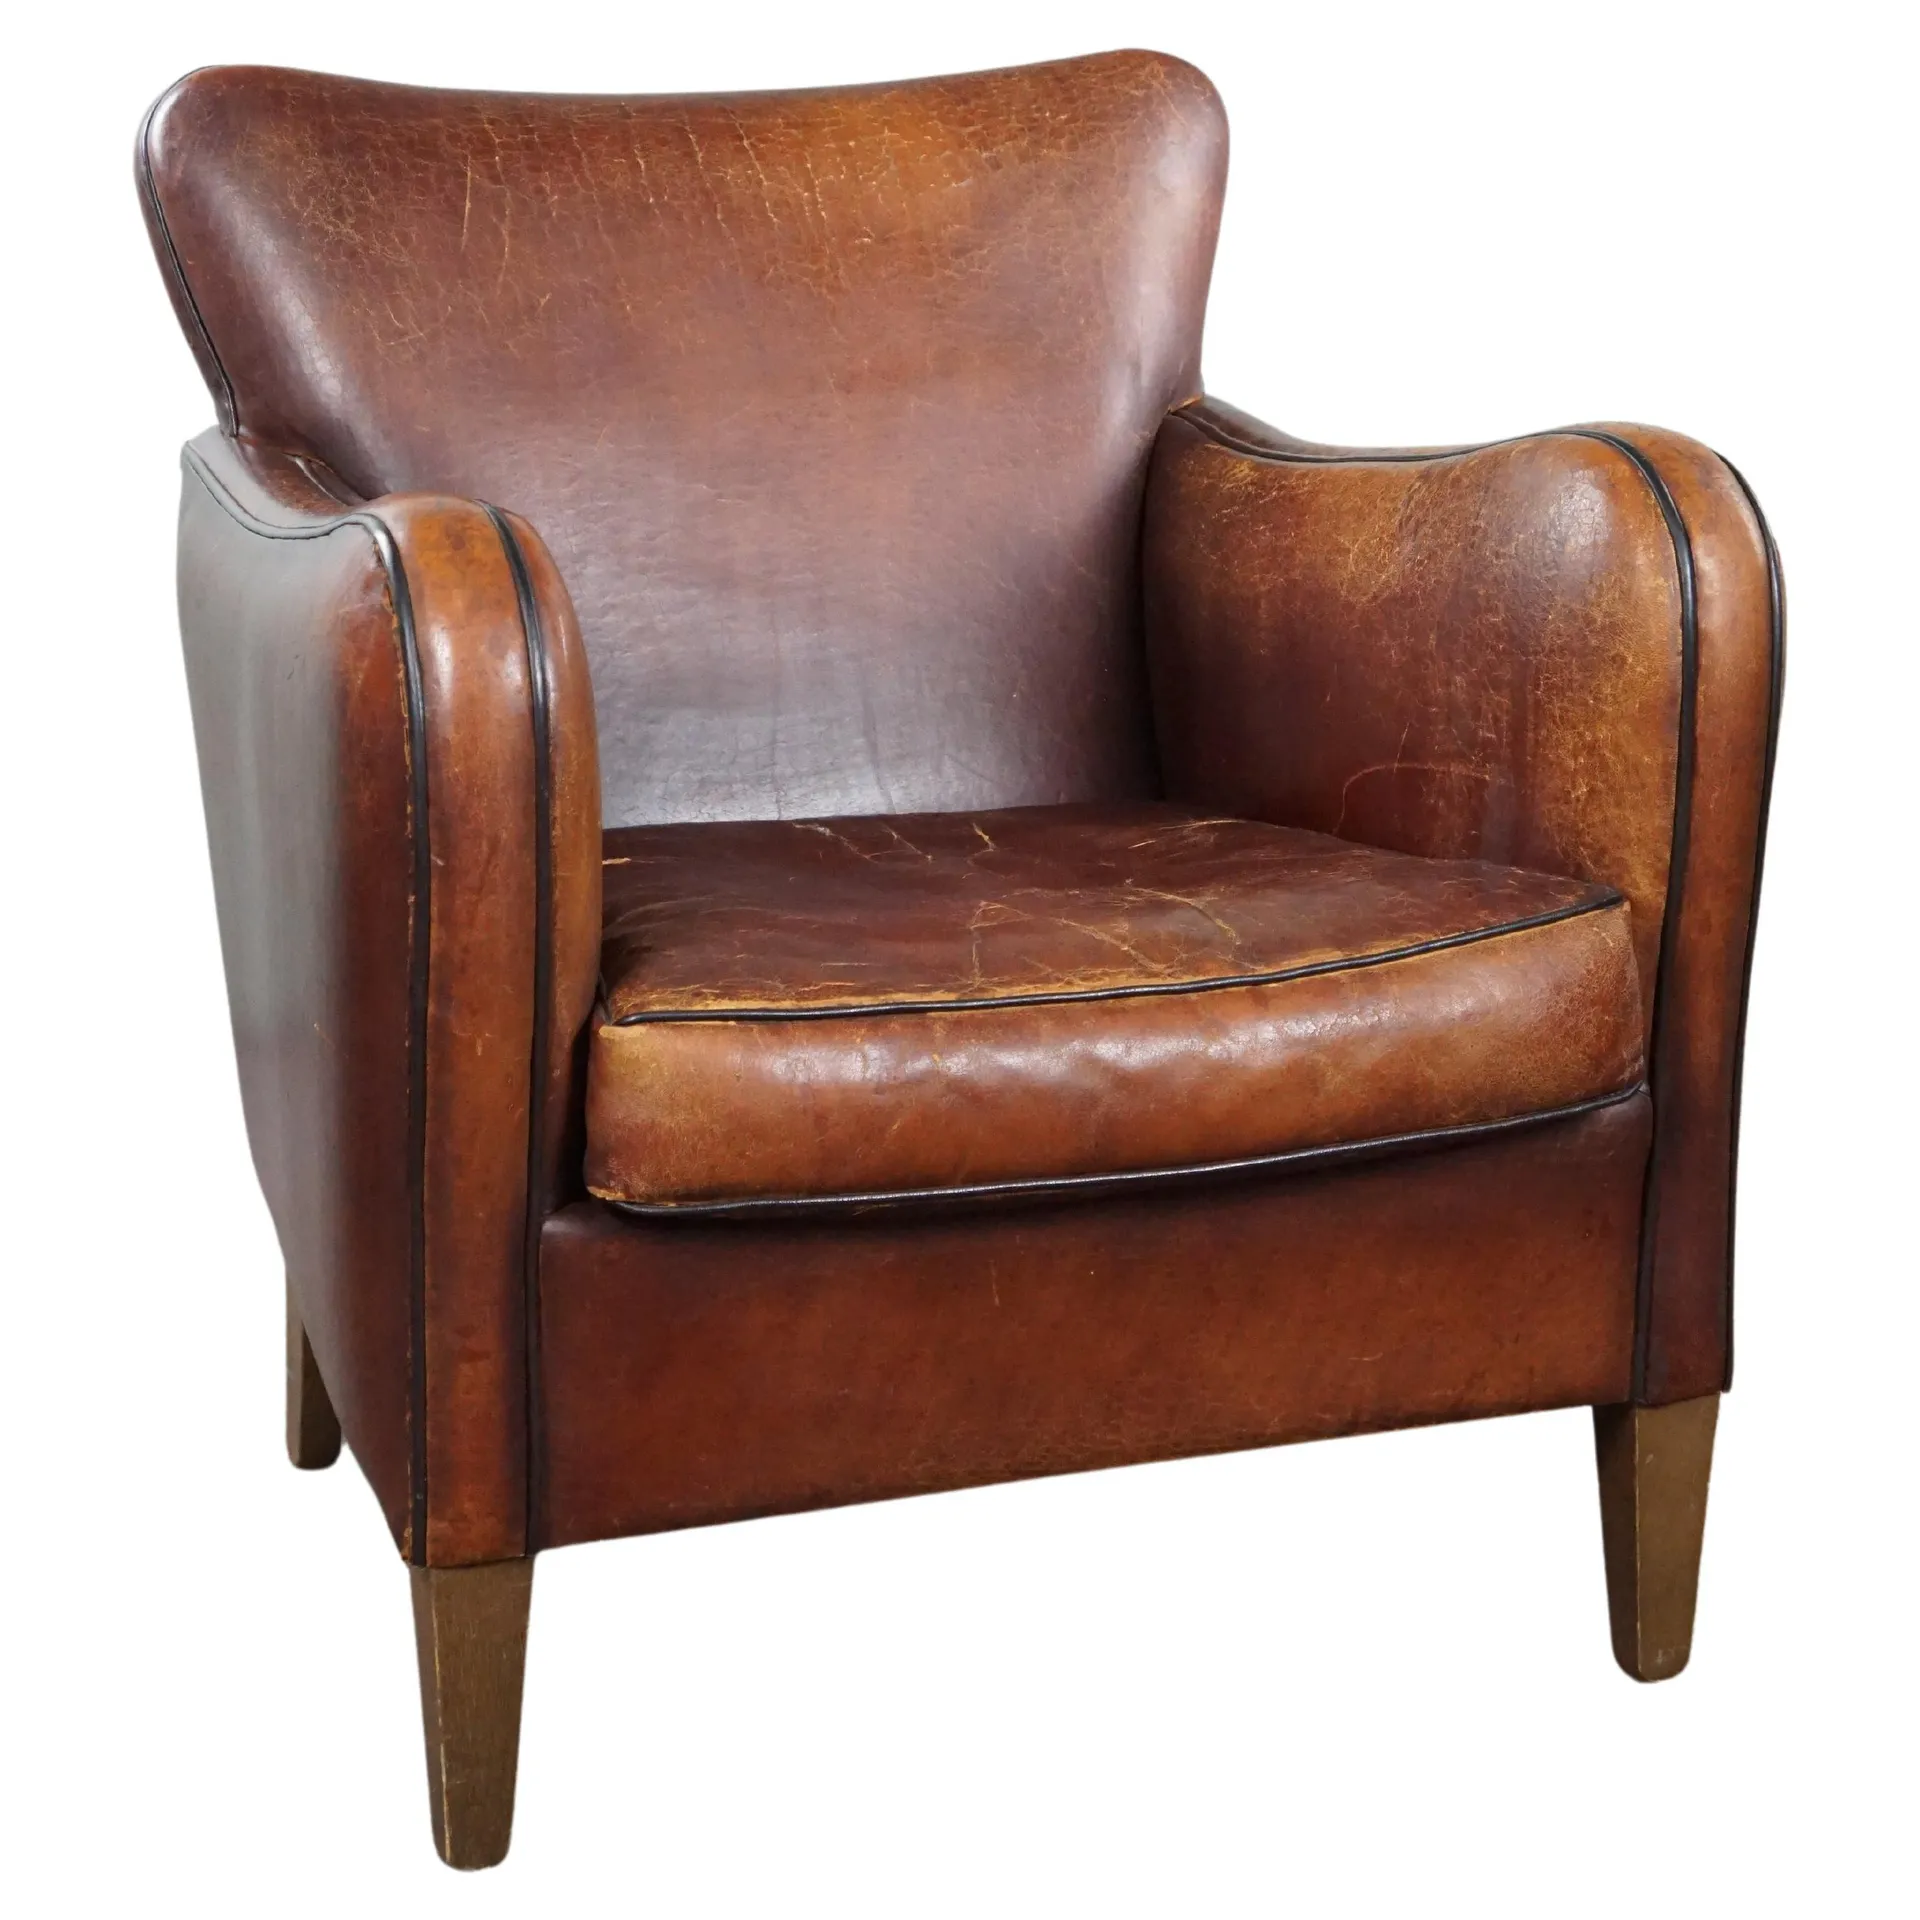 Sturdy, weathered but very comfortable sheepskin armchair